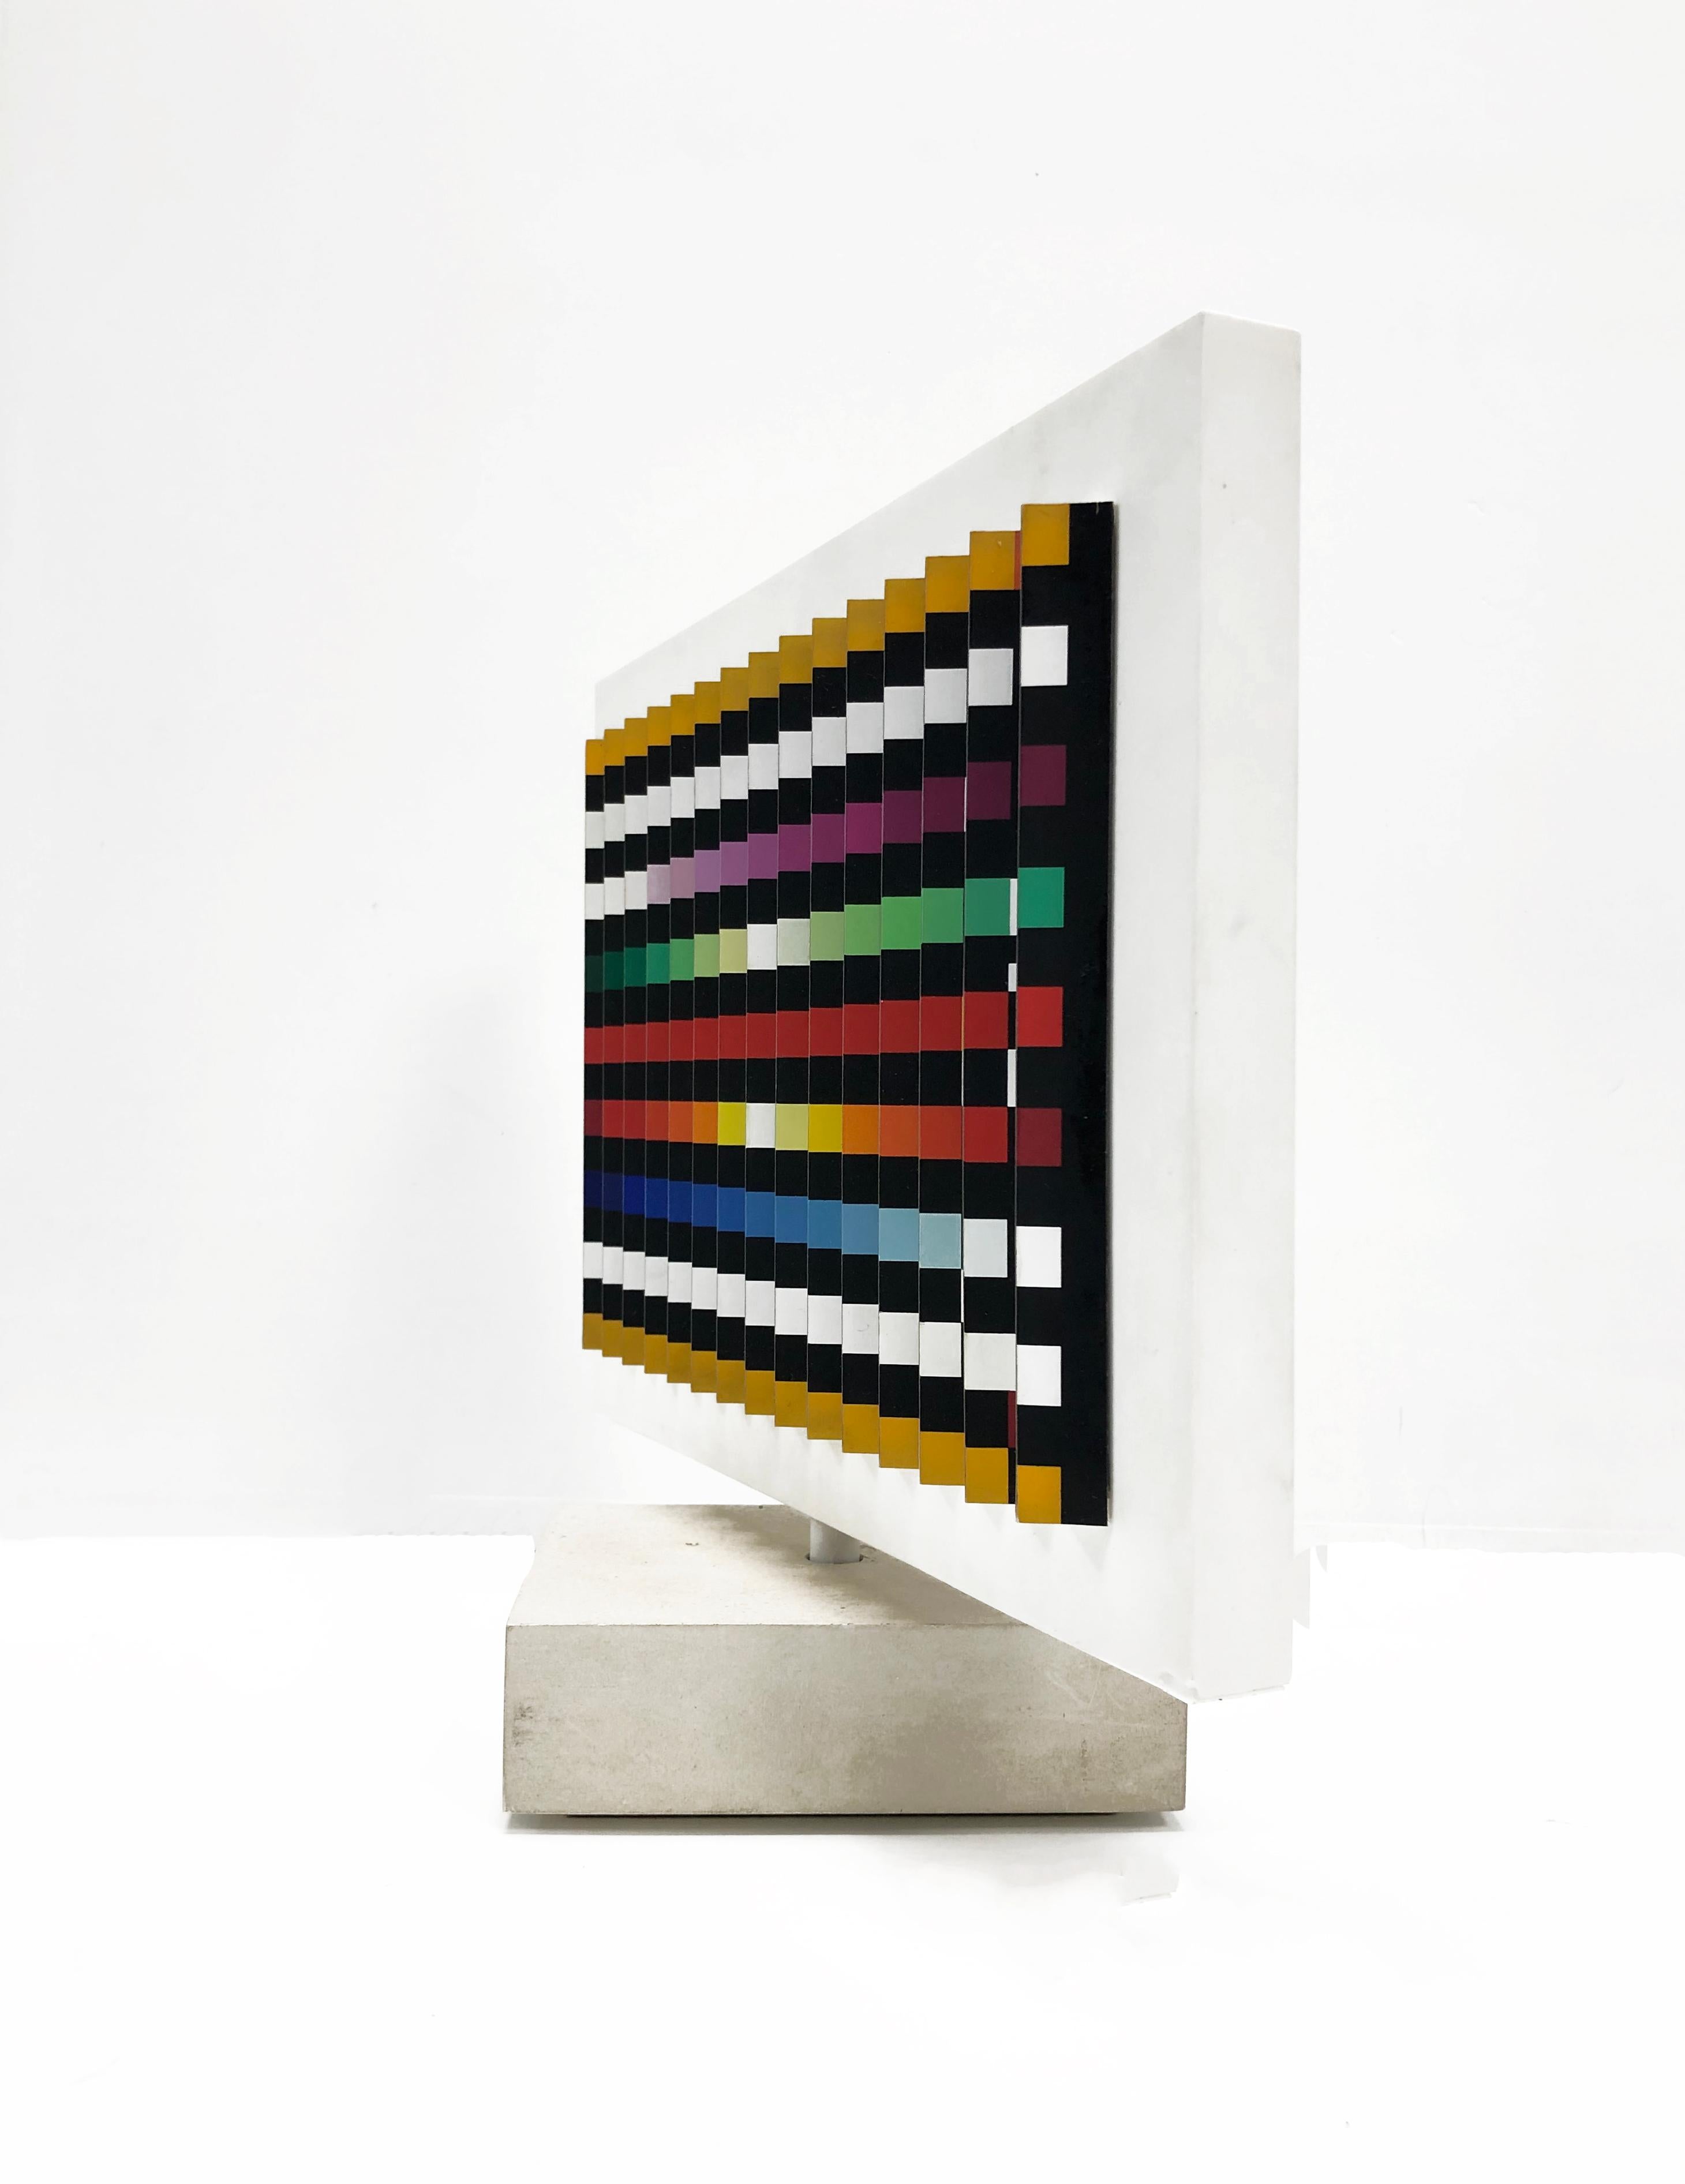 Double sided spinning polymorph kinetic sculpture made with silkscreen on folded PVC.  Measures 11.5 x 12.75 x 4.75 inches including wooden base.   Hand signed and numbered by Yaacov Agam on the underside.  Edition 76/150.

Additional images